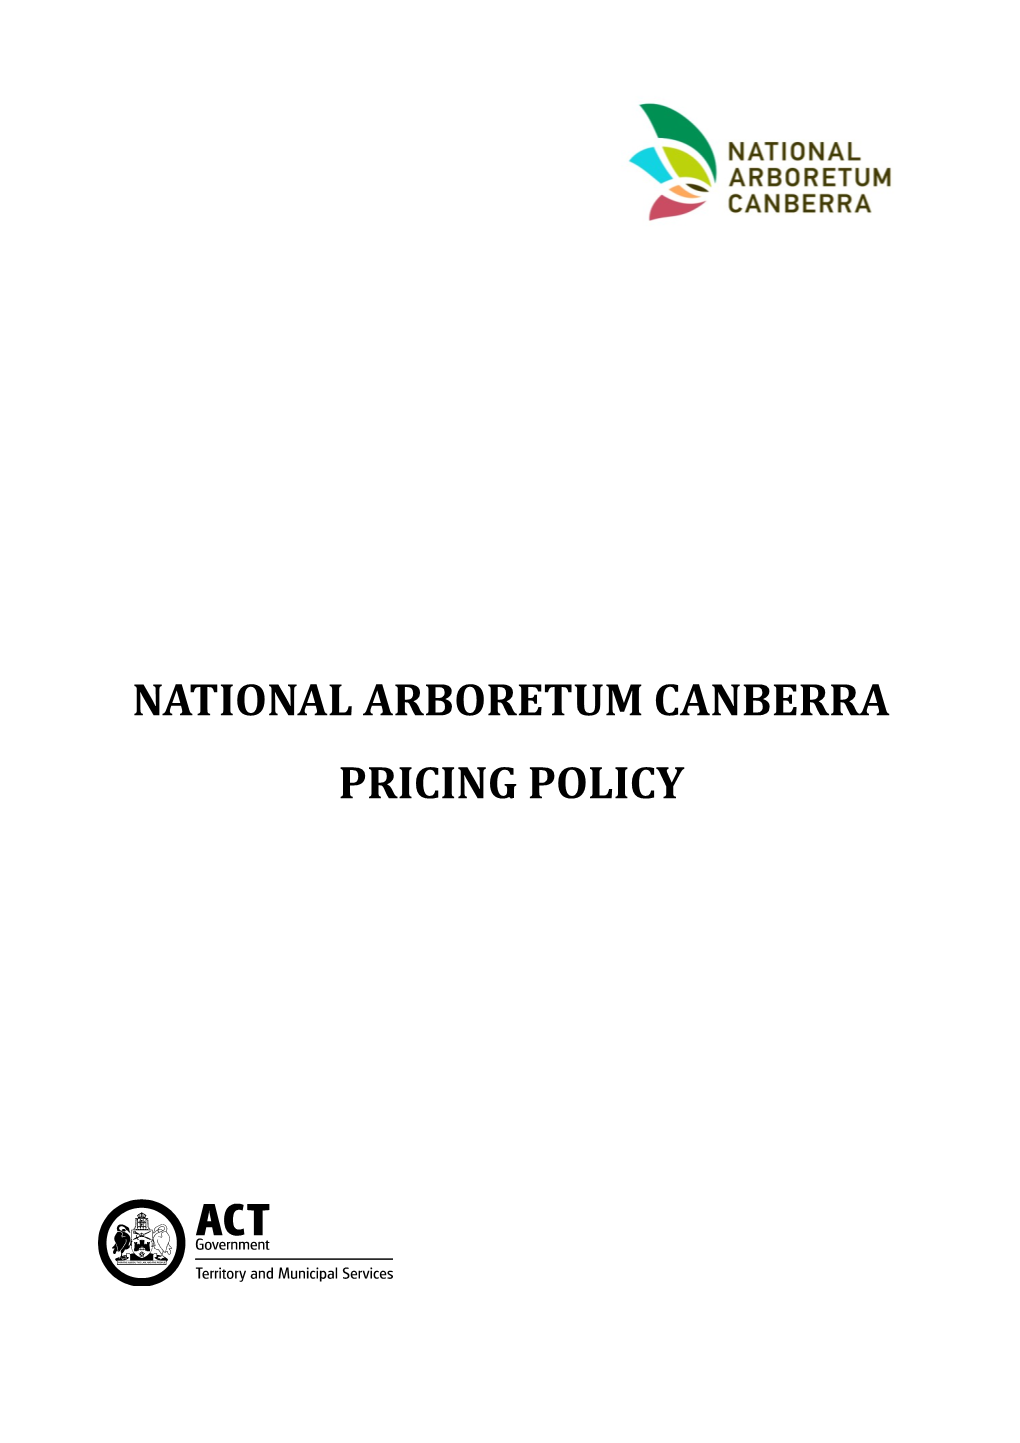 National Arboretum Canberra Pricing Policy